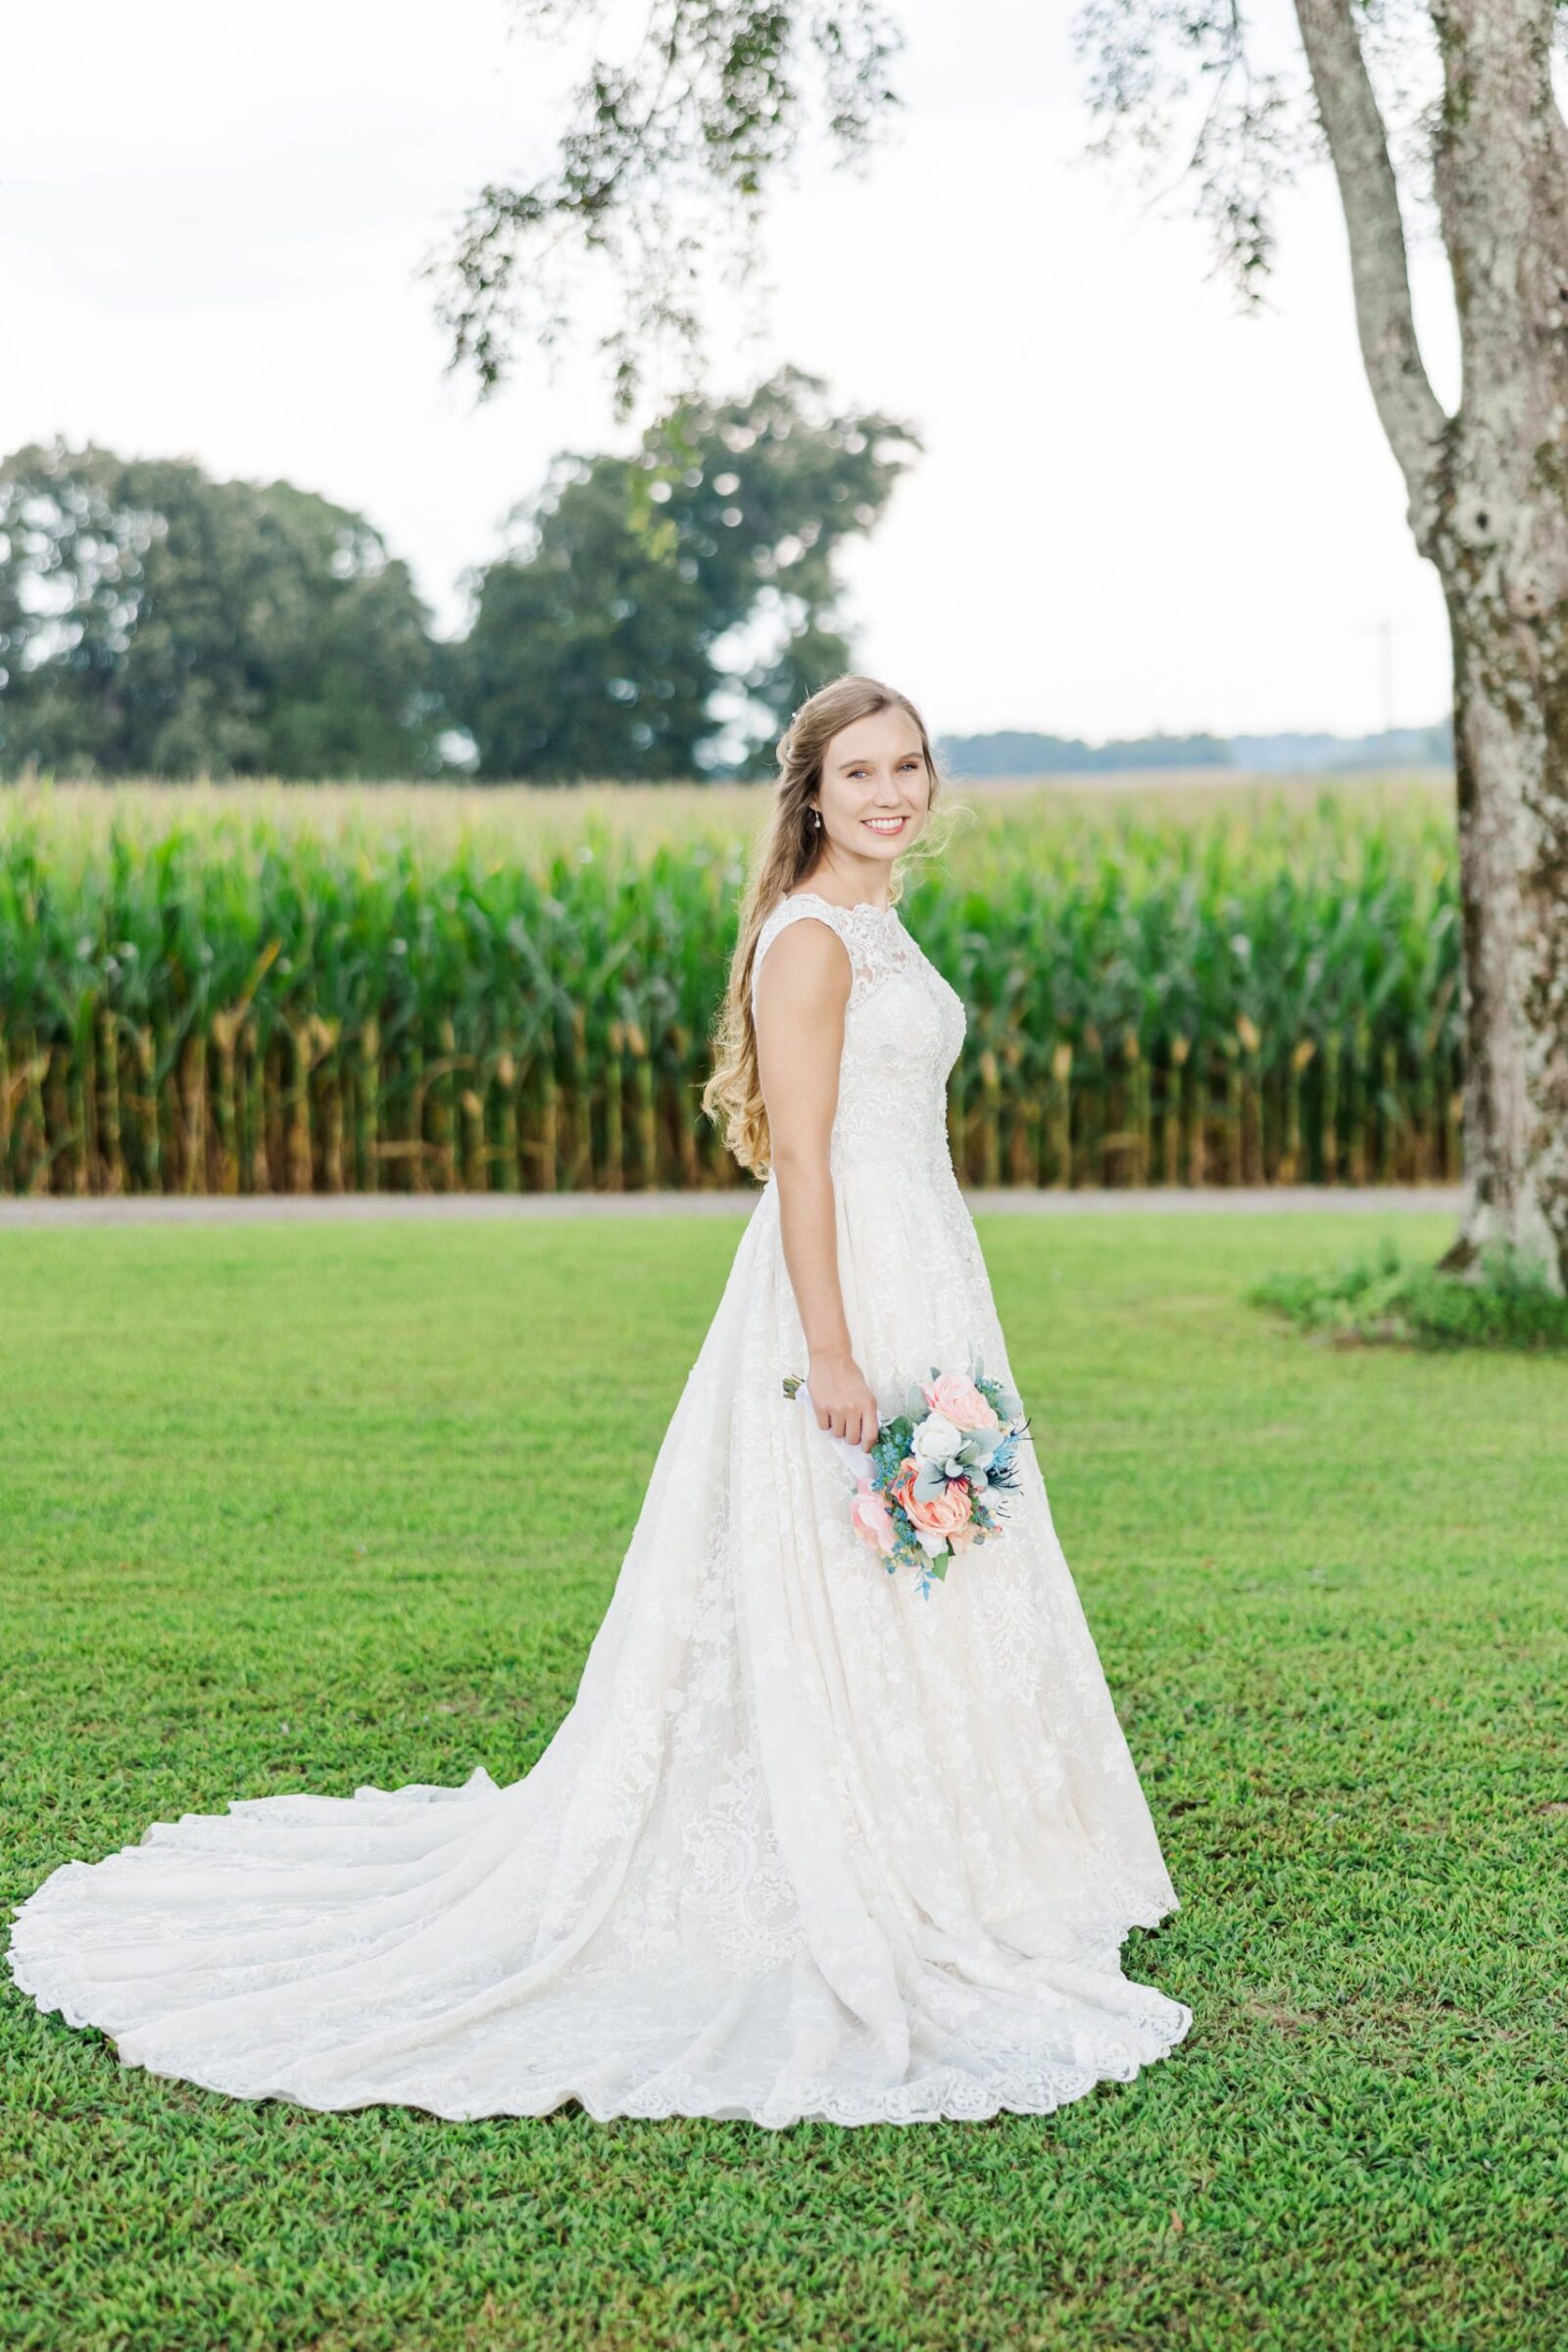 Dana holding her bouquet in front of a cornfield for her outdoor Virginia bridal portait